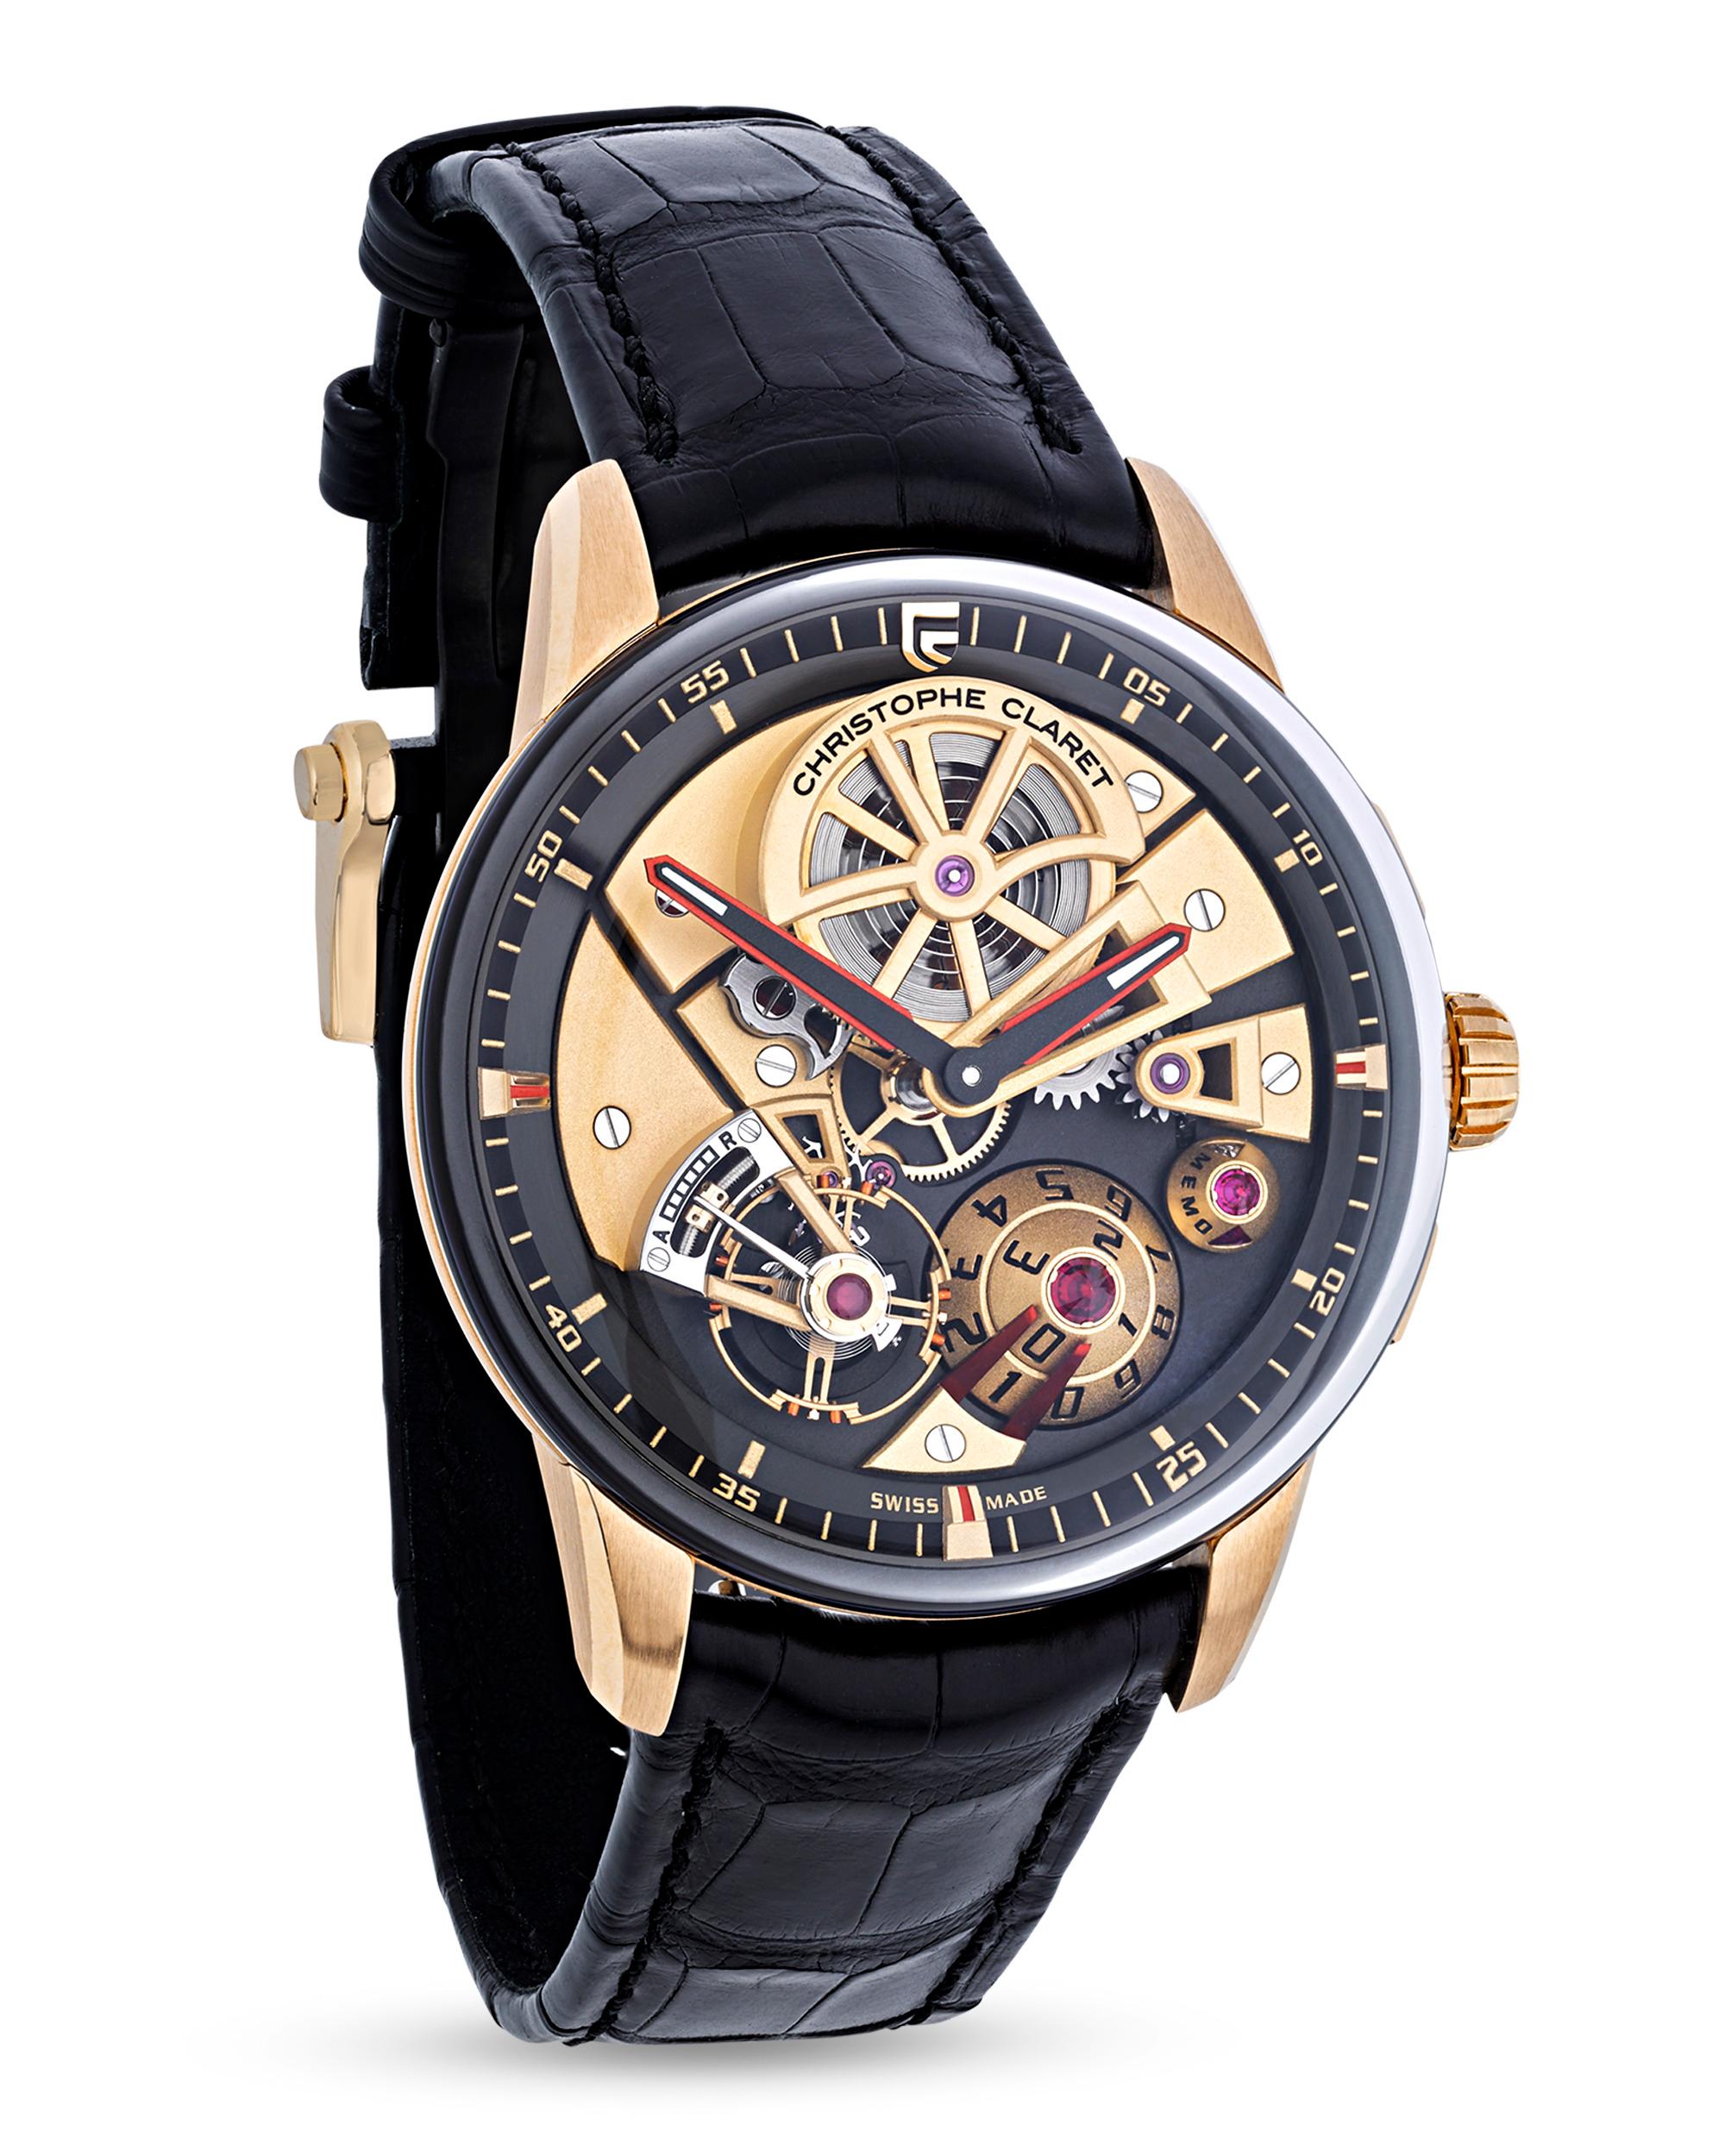 This wristwatch by Christophe Claret is part of the limited edition Maestro collection, and it displays a plethora of novel complications upon a playfully modern face. A large conical date dial topped with a ruby sits at 5 o’clock, creating a